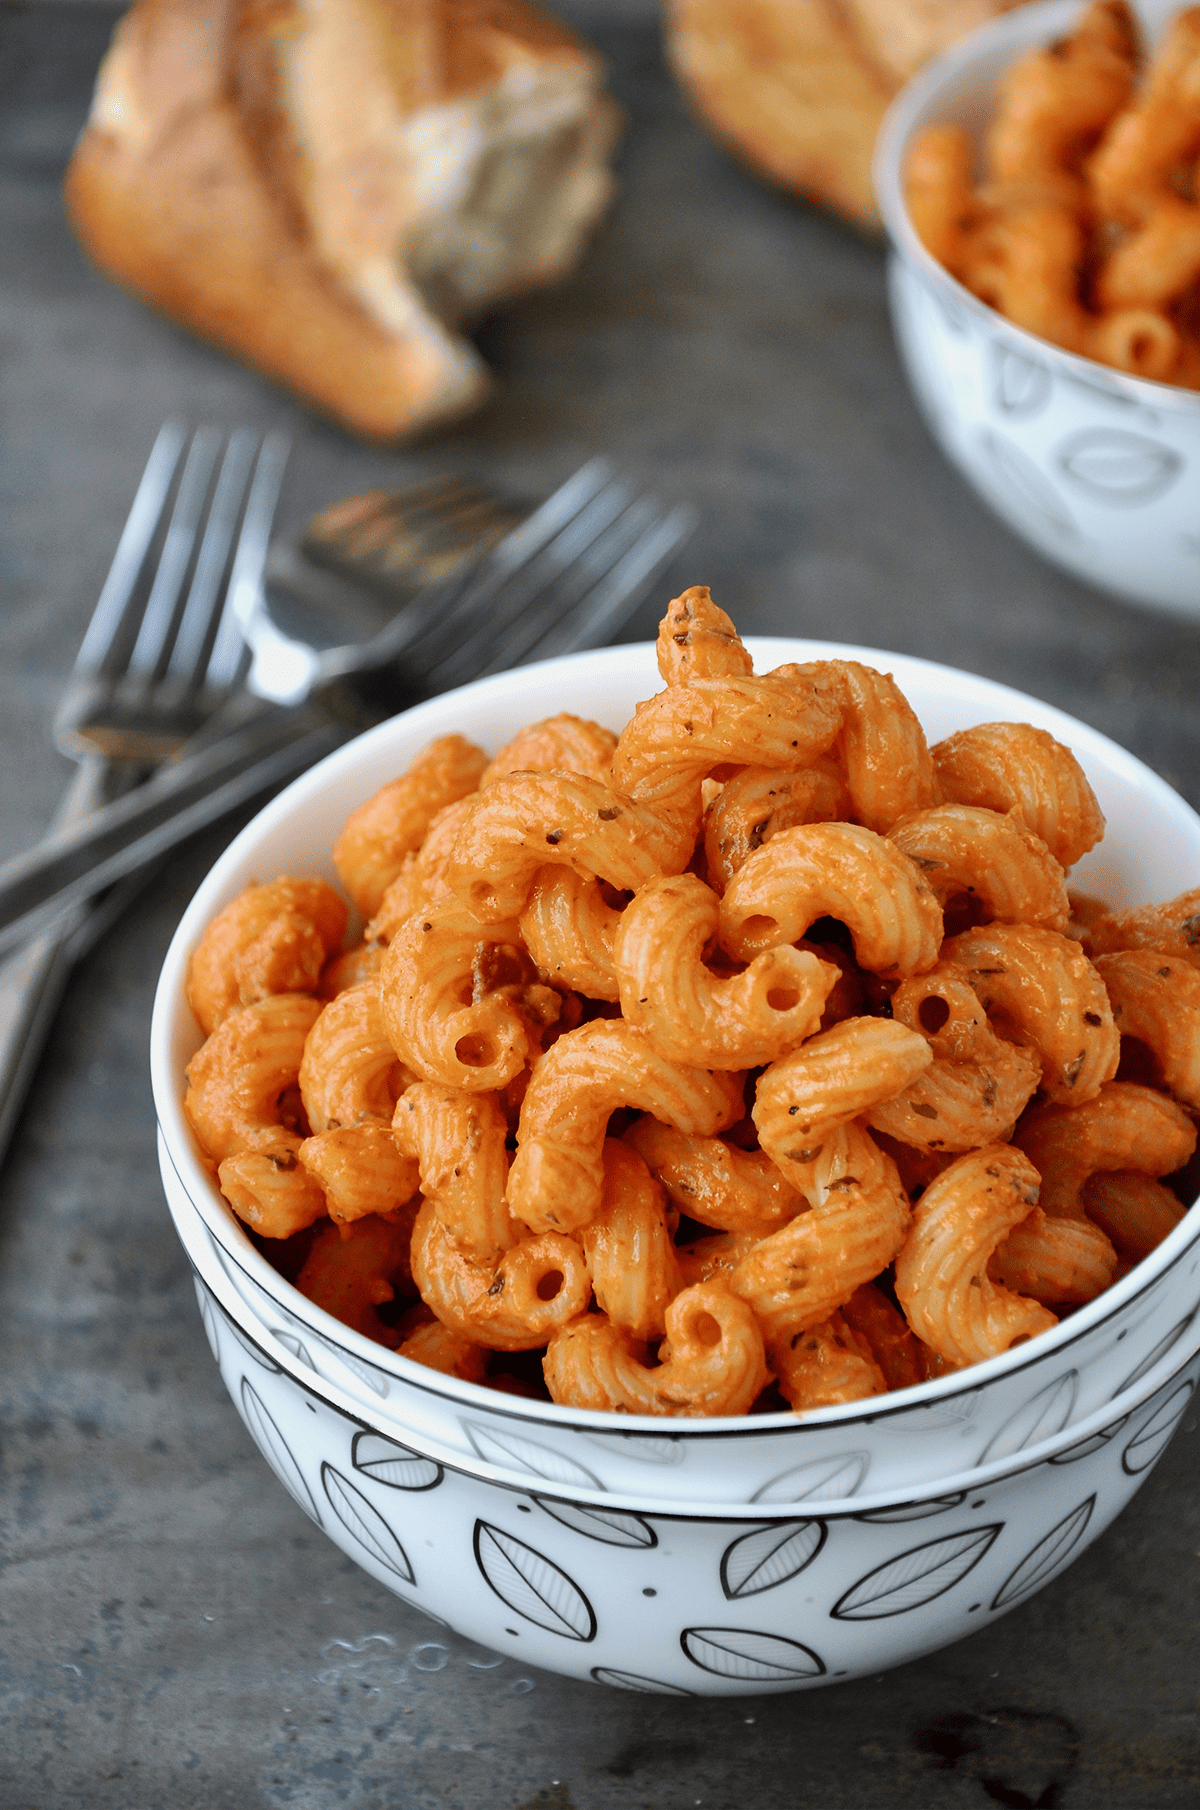 A small bowl of cavatappi pasta with pancetta and vodka sauce sits on a grey counter, with forks and crusty hunks of bread nearby.